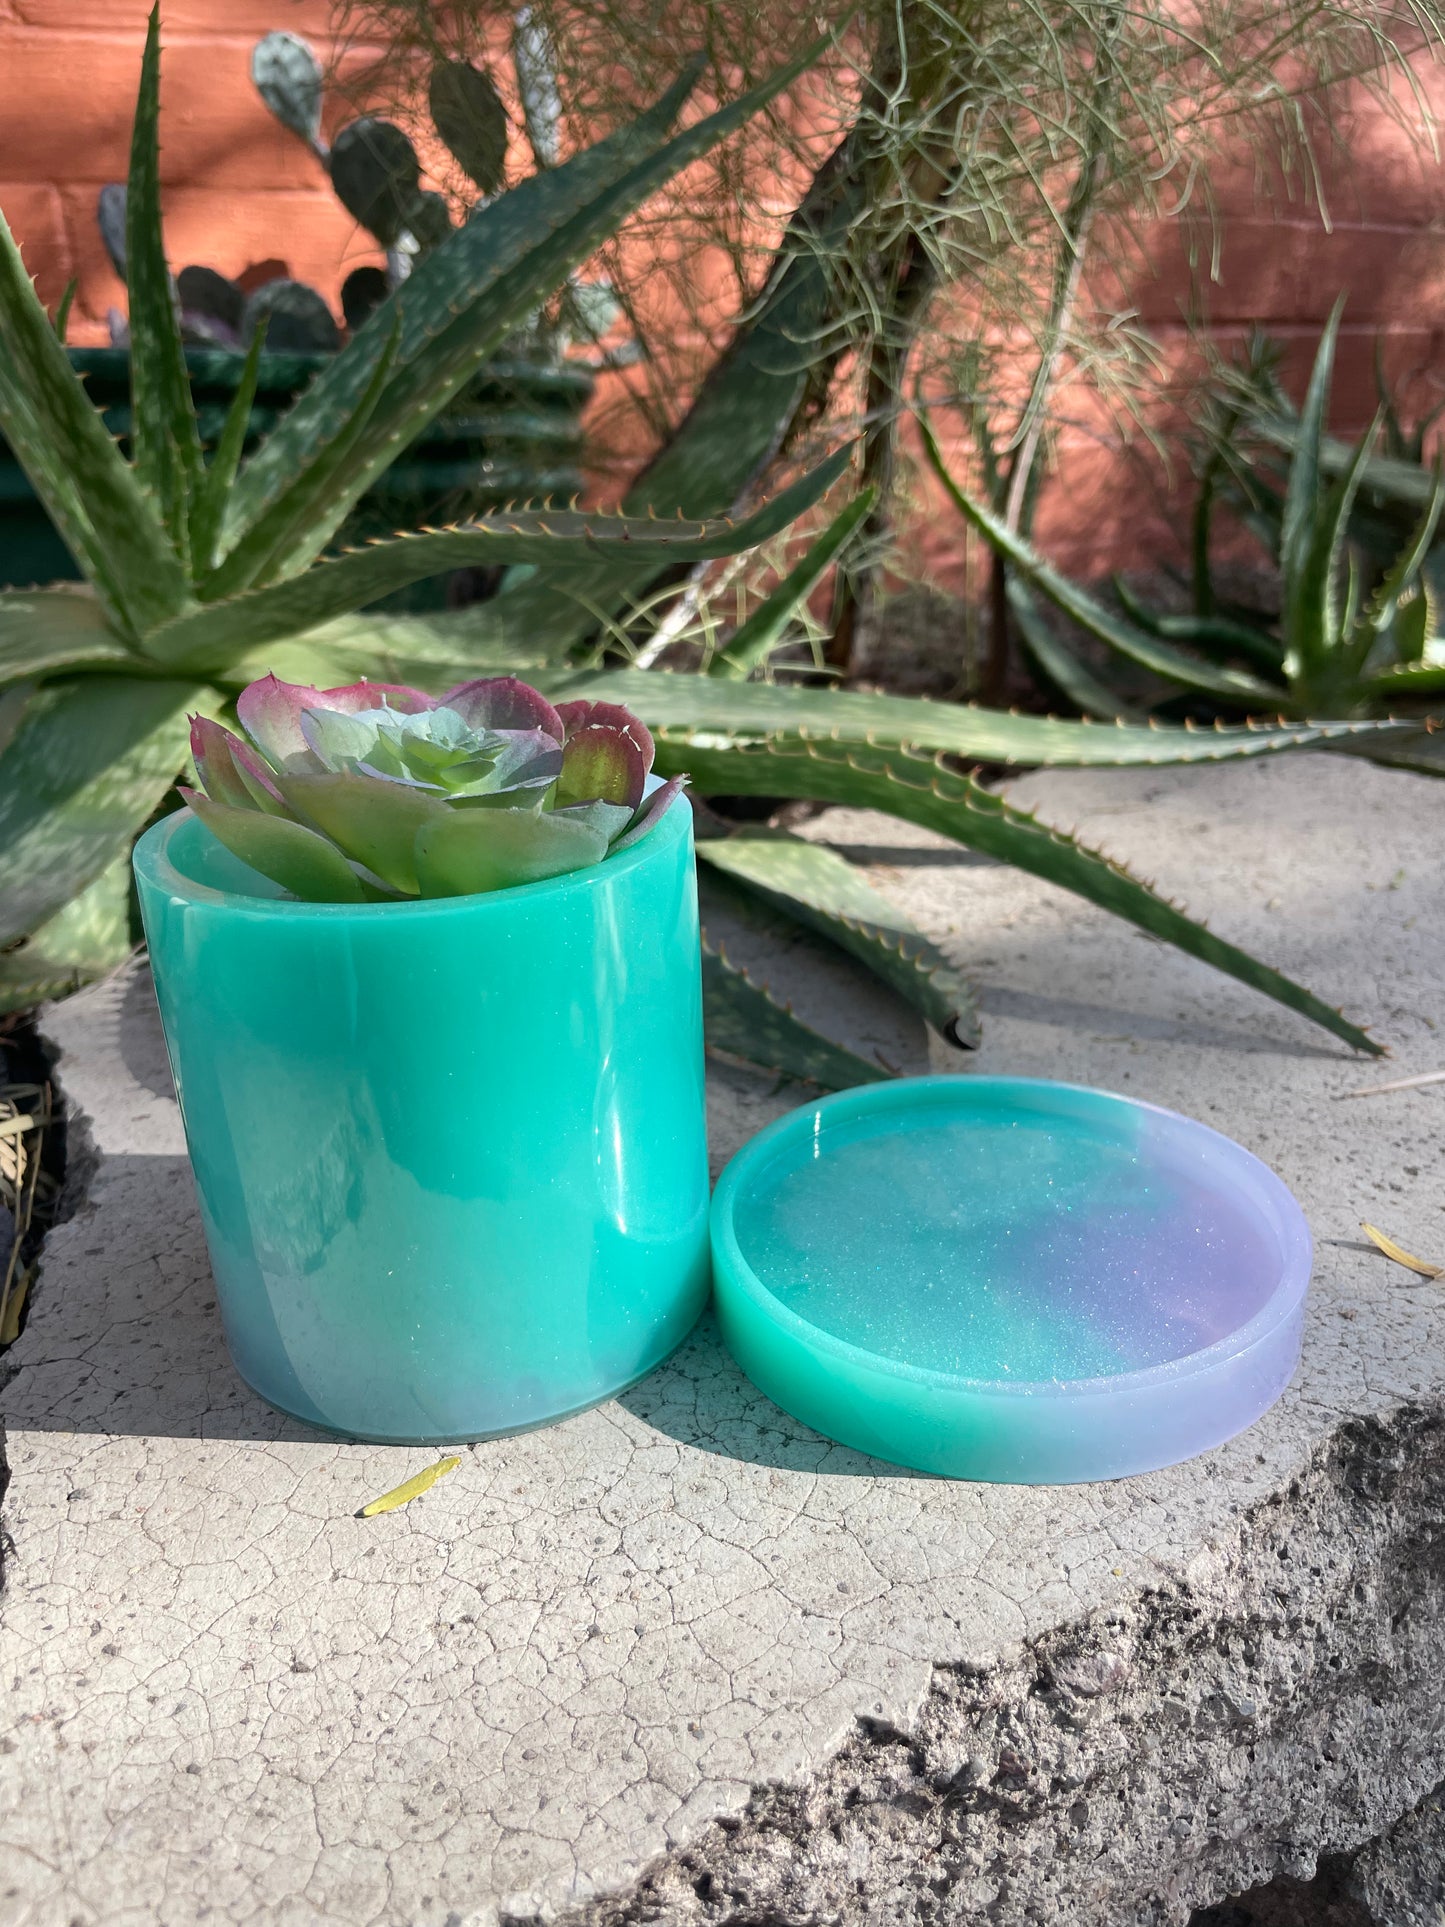 Cylinder Planter with Succulent (not real)